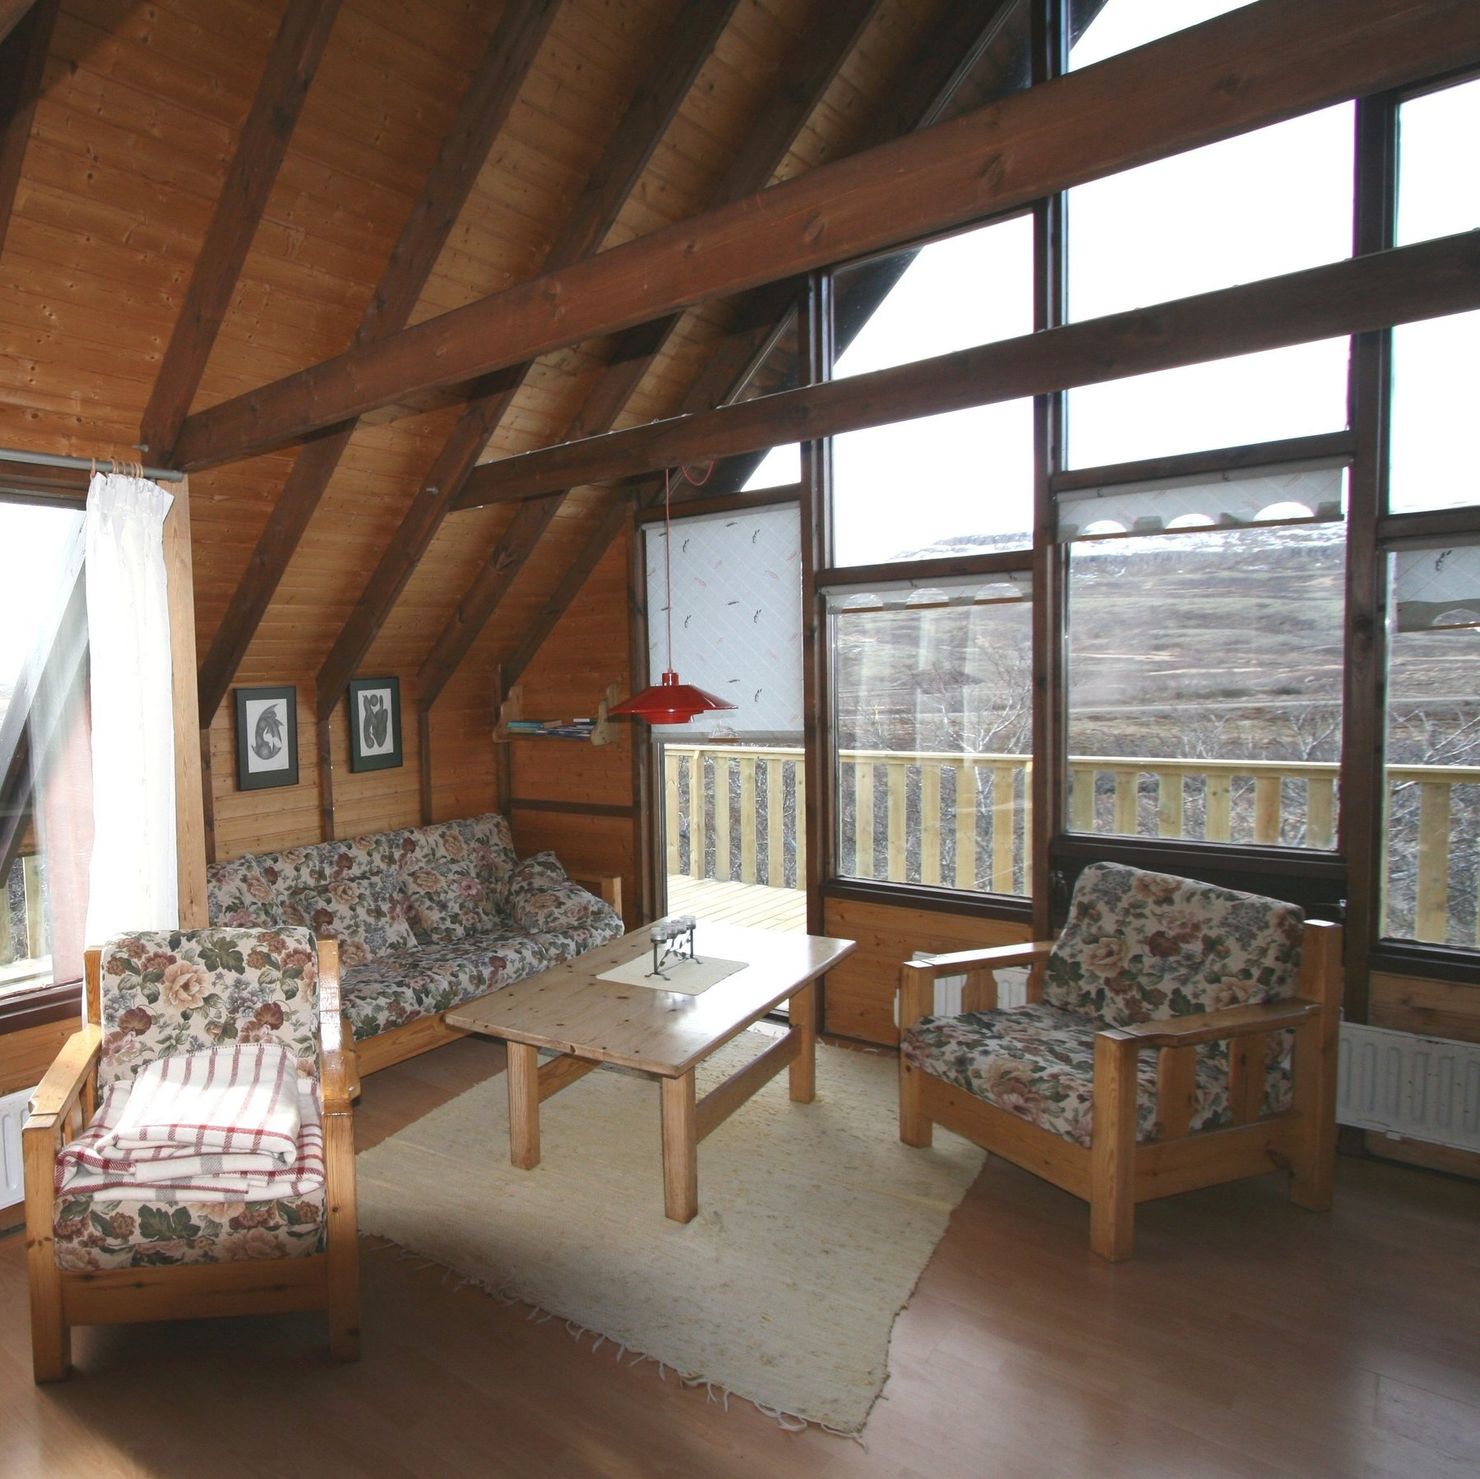 Large panoramic windows in the living area provide plenty of light